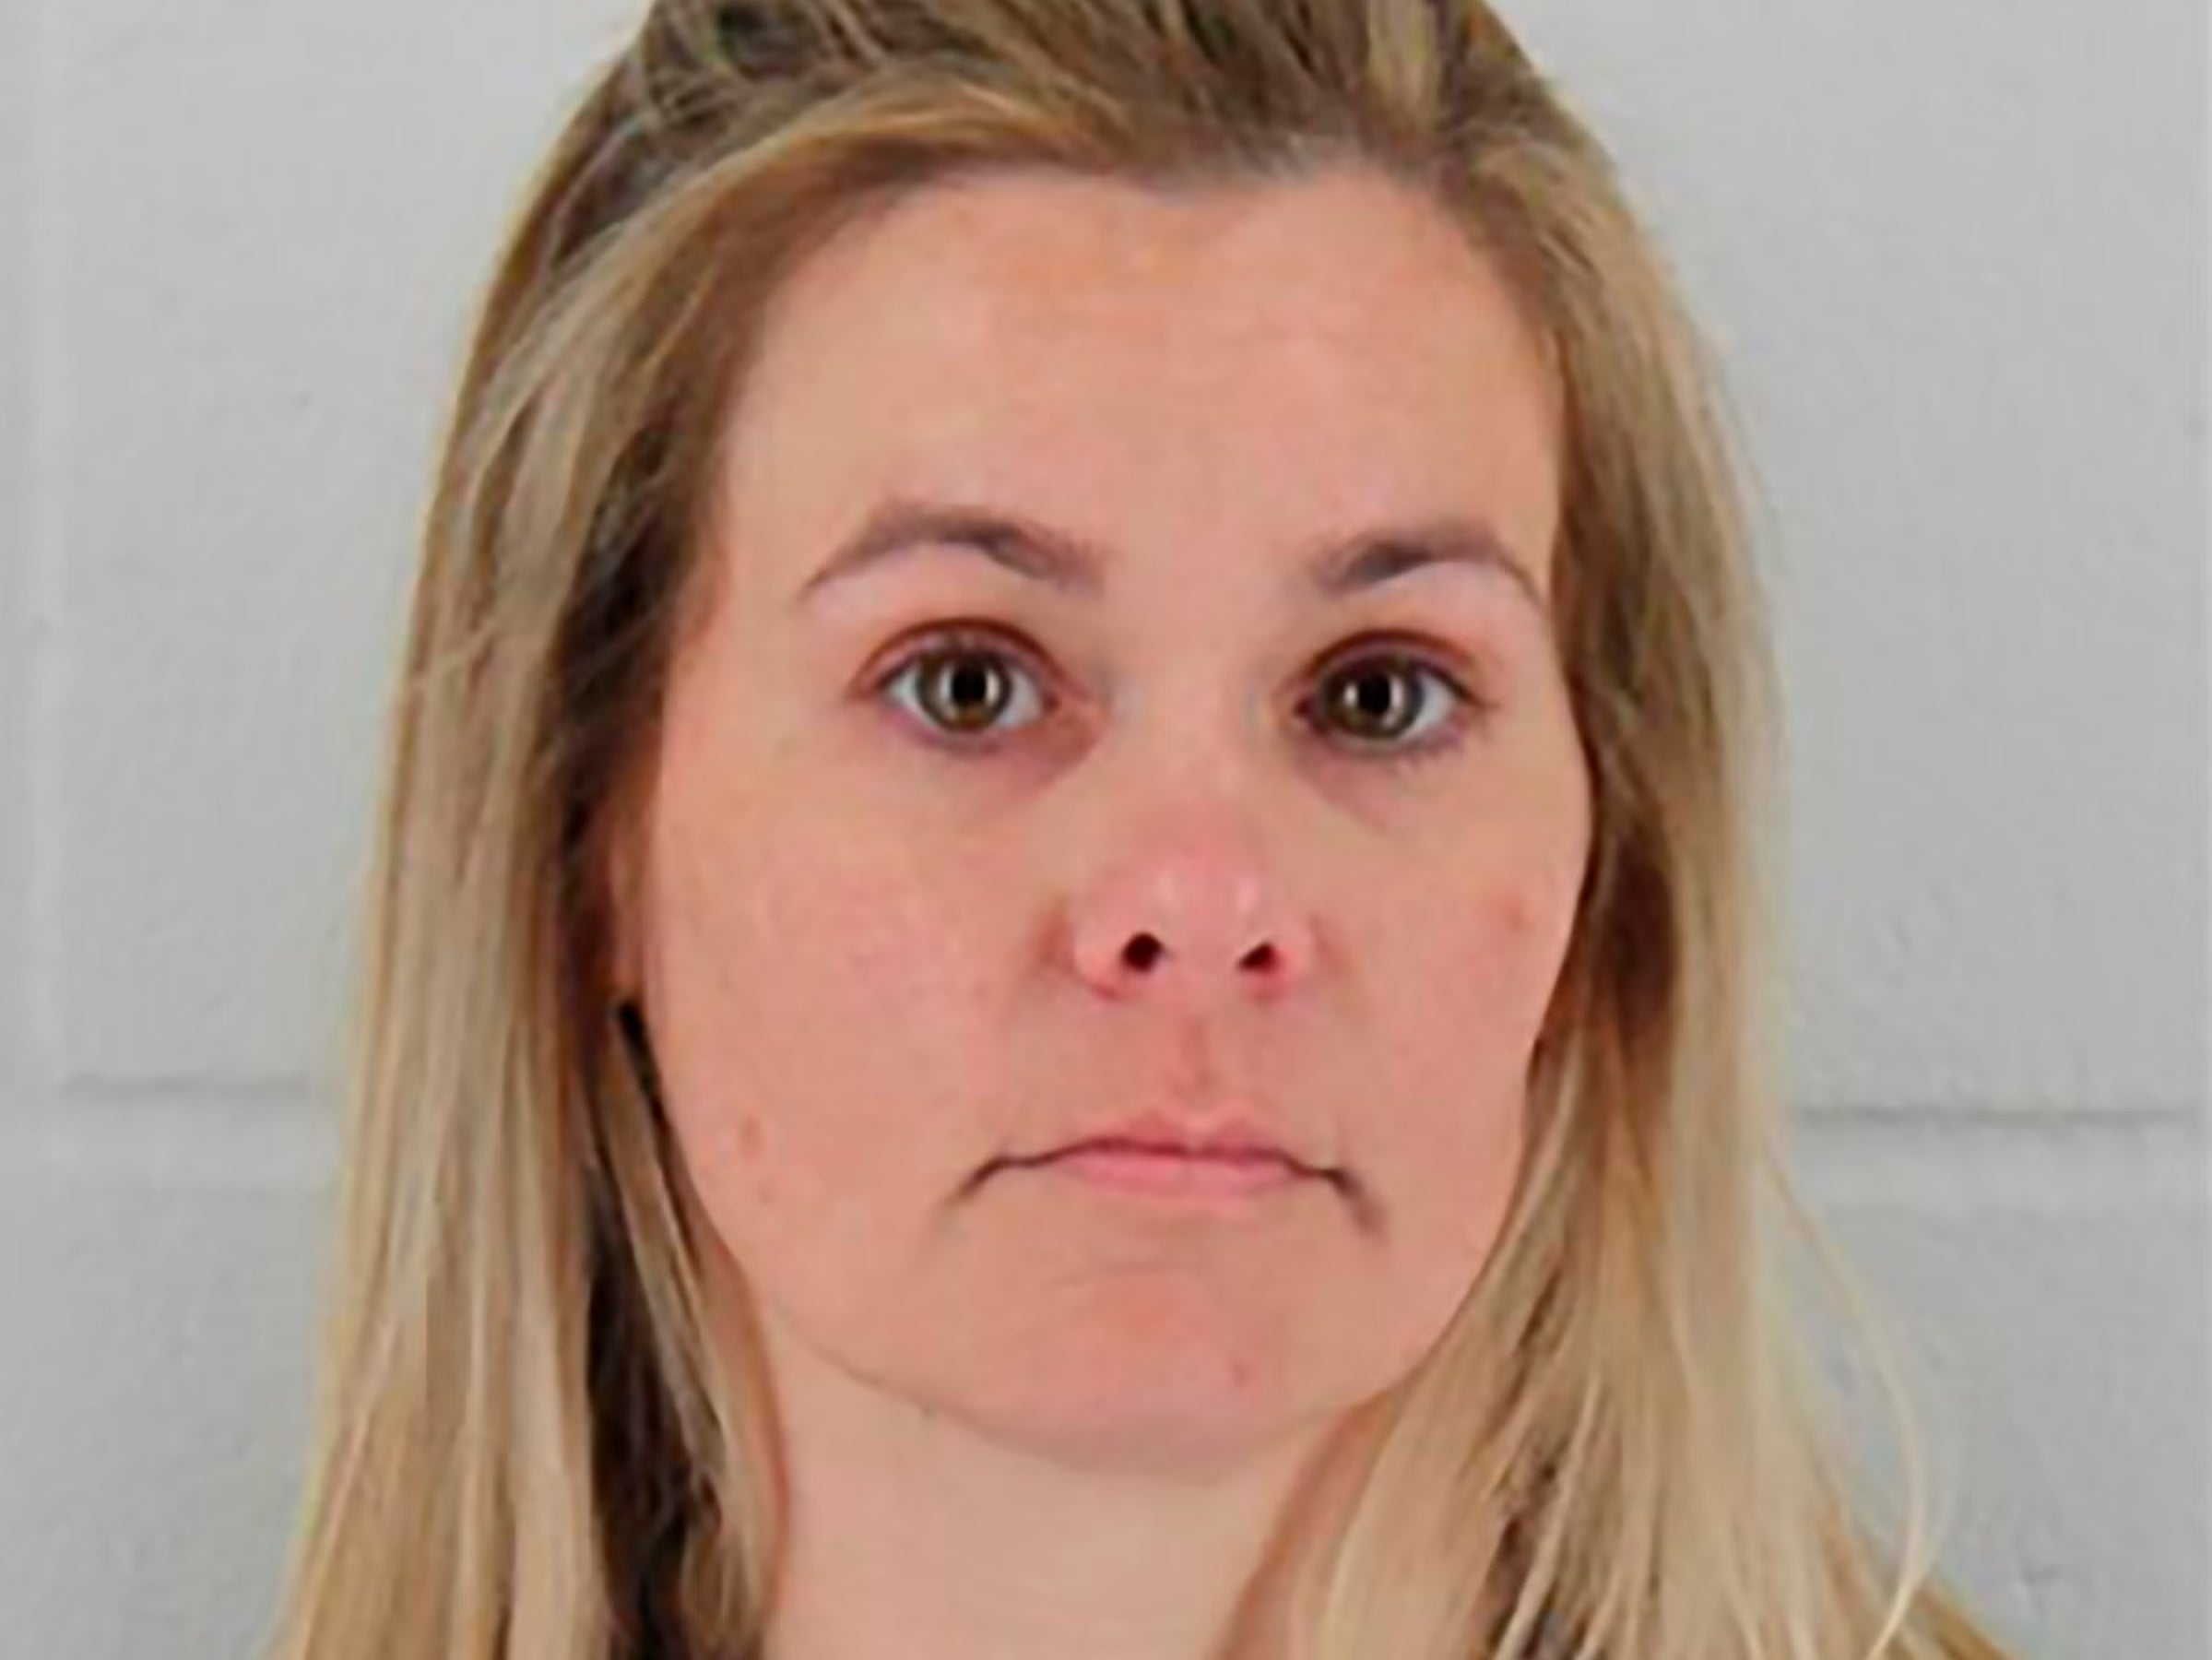 Jennifer Hall, who was arrested in May 2022, was sentenced on Friday to a state prison